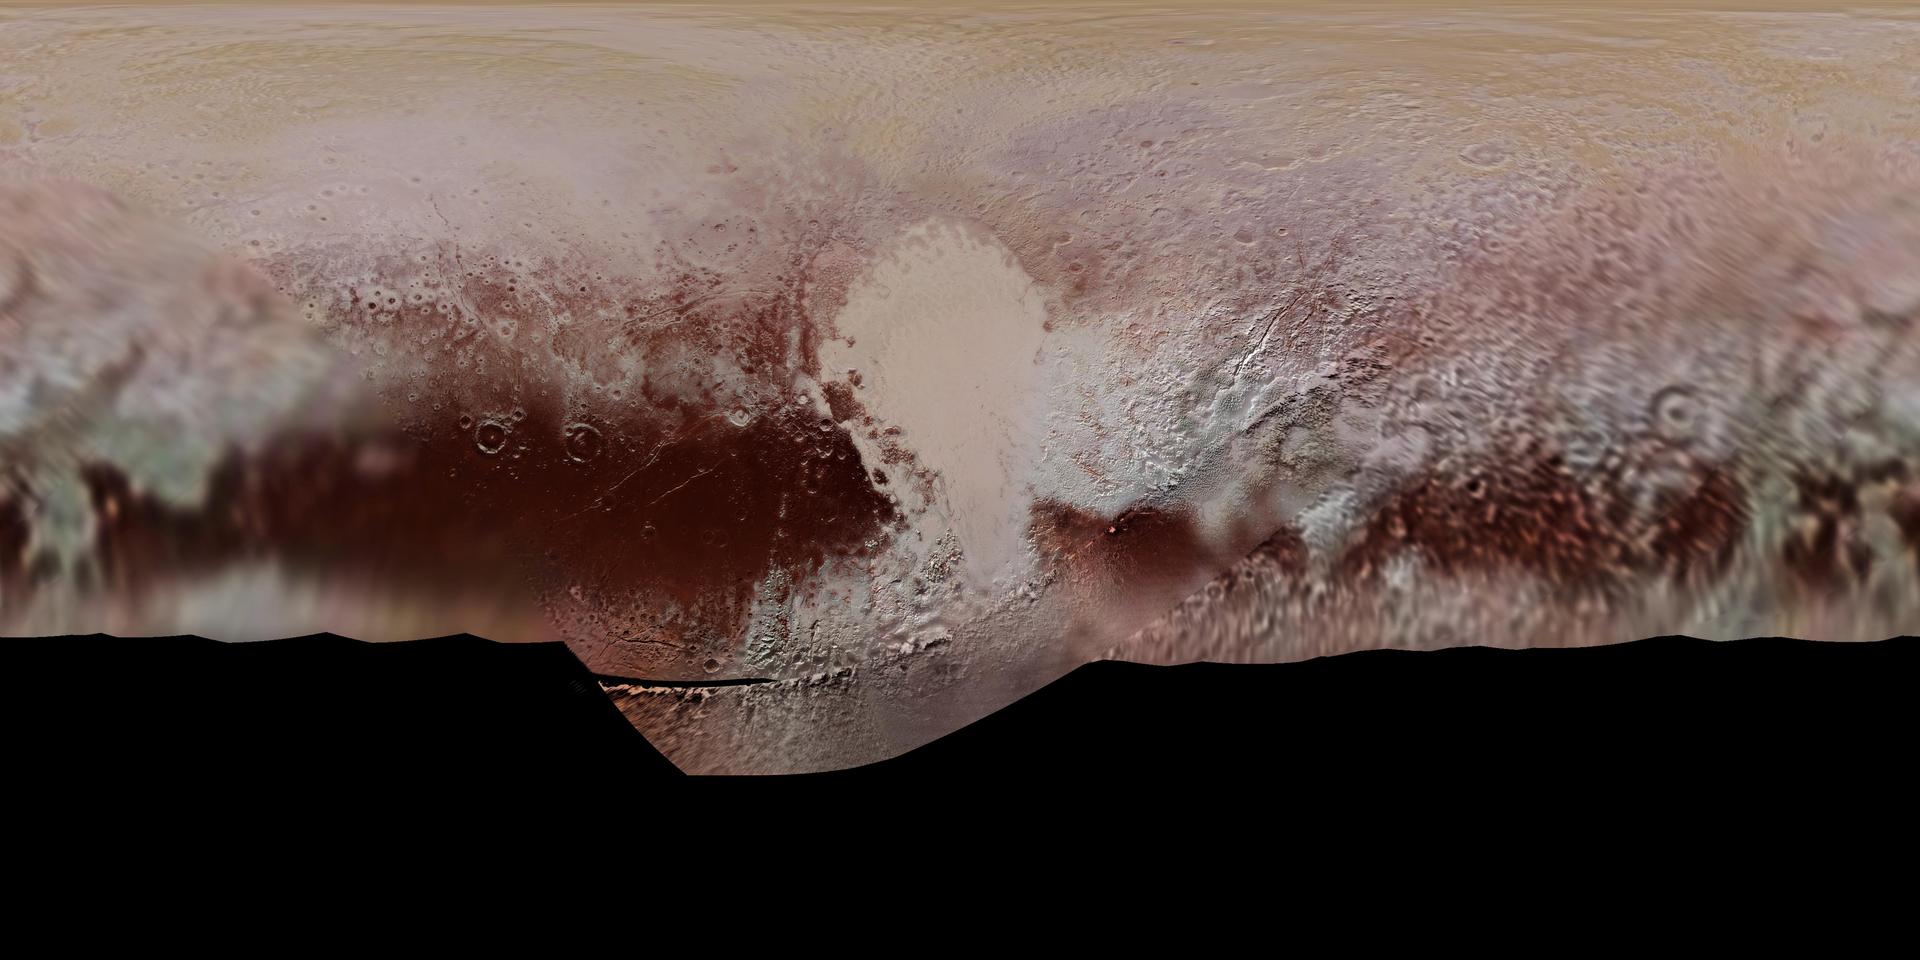 This detailed global mosaic color map of Pluto is based on a series of three color filter images obtained NASA's New Horizons during the spacecraft close flyby of Pluto in July 2015.